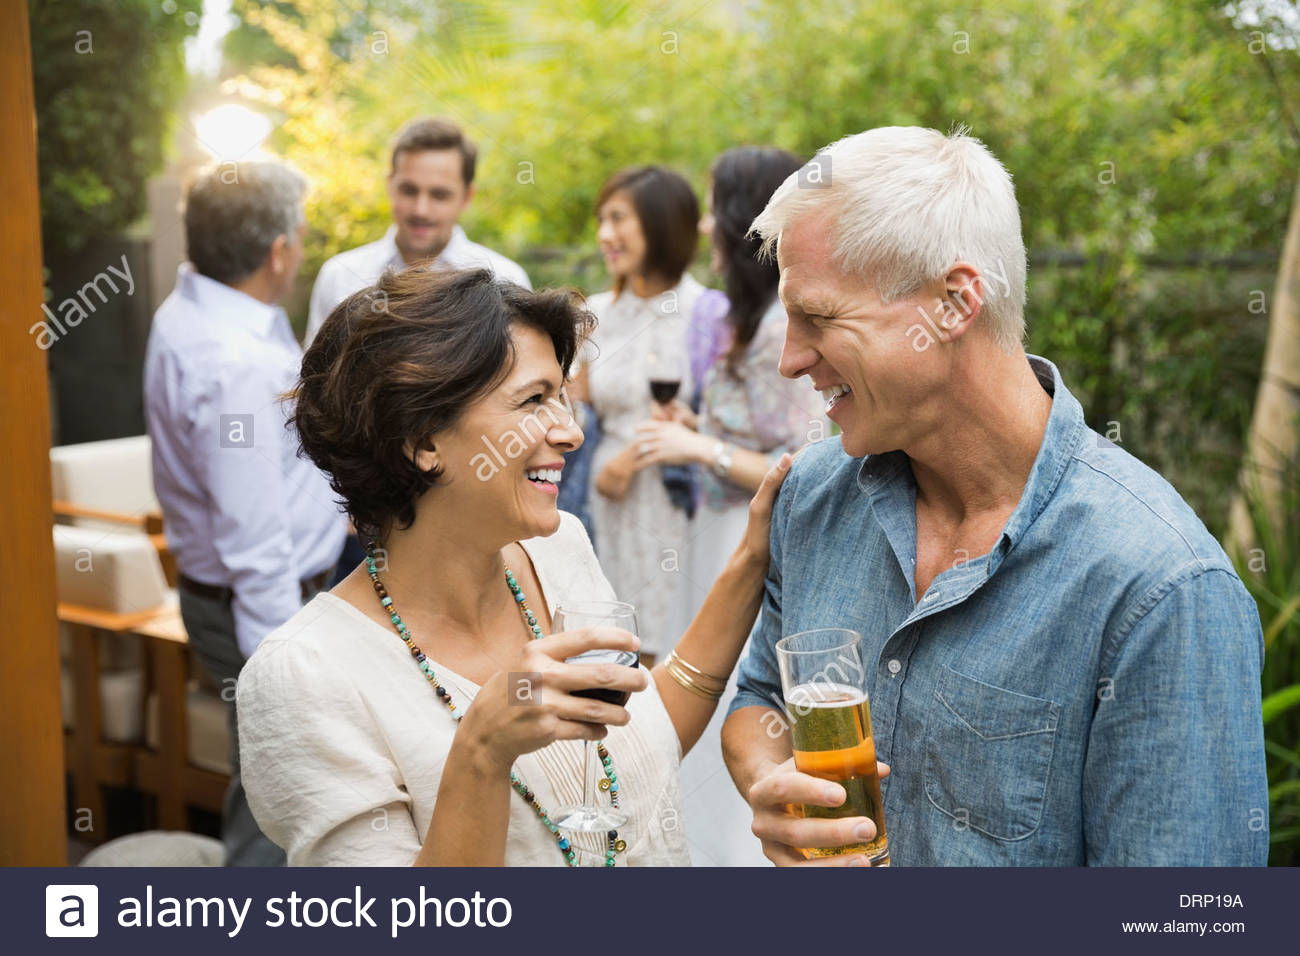 Couple with drinks at outdoor party Stock Photo